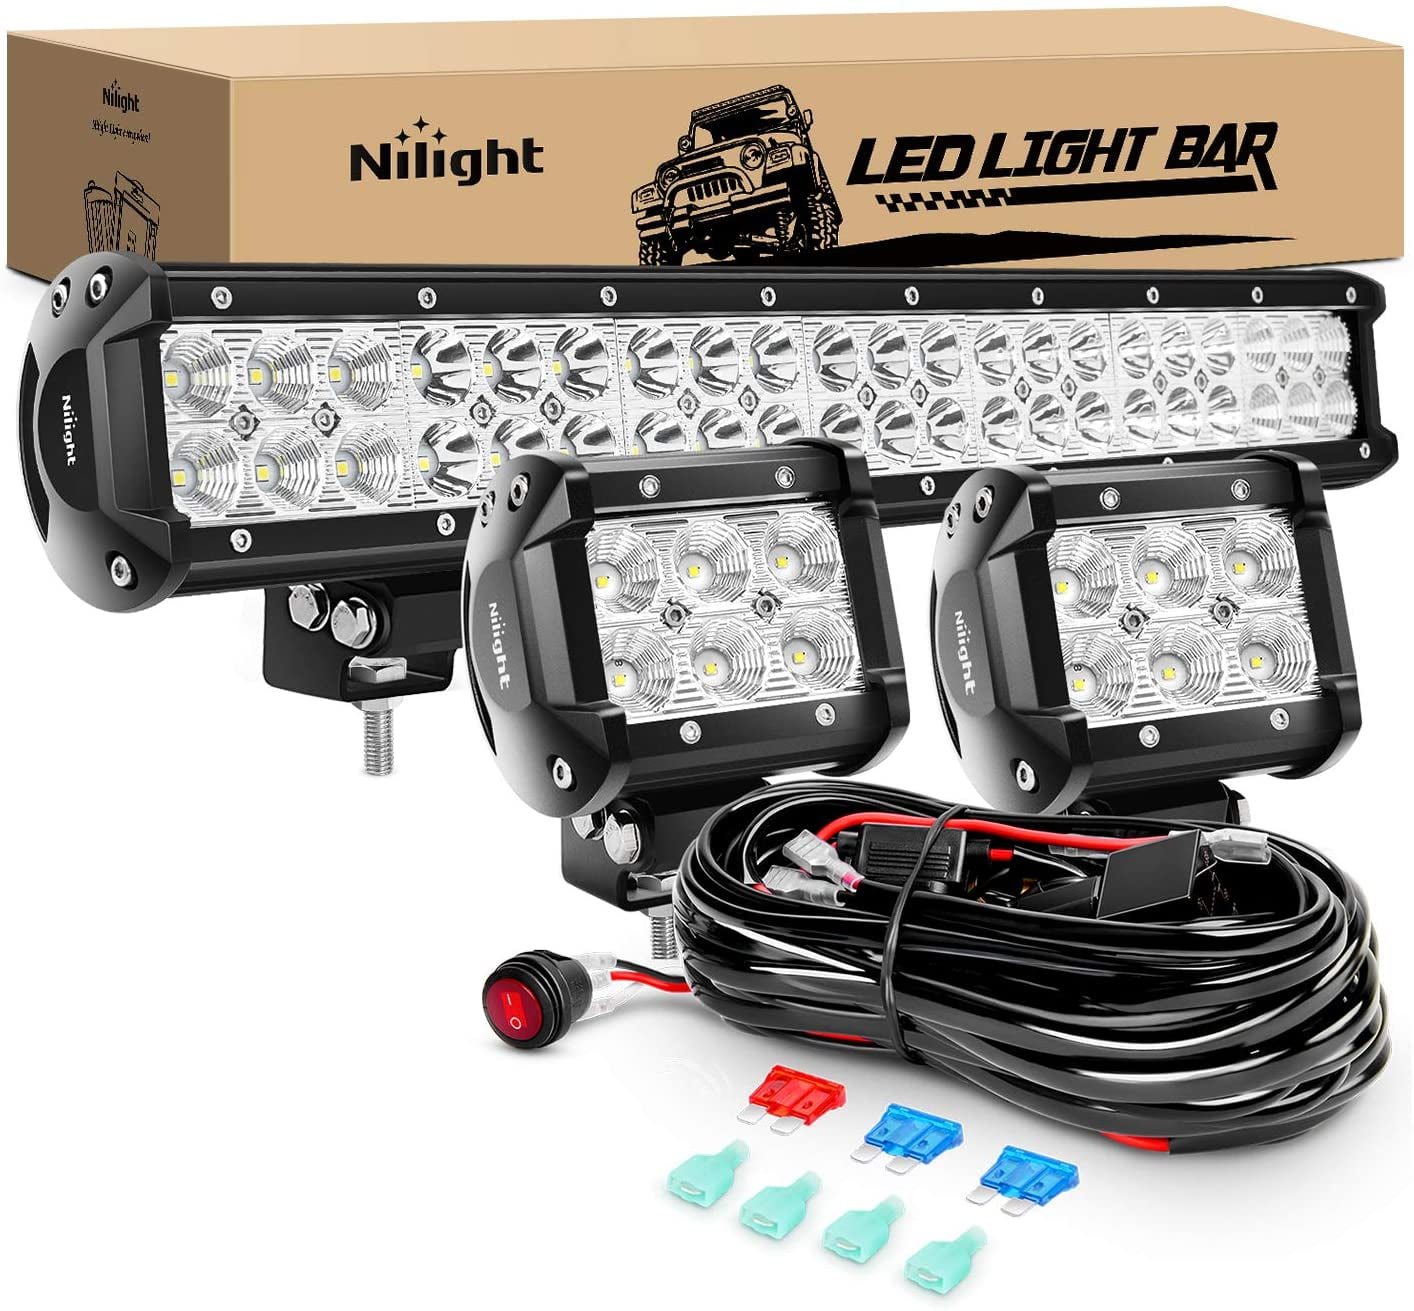 20" inch 126W Cree LED Work Light Bar Spot Flood Combo Beam Lamps For Jeep Boat 